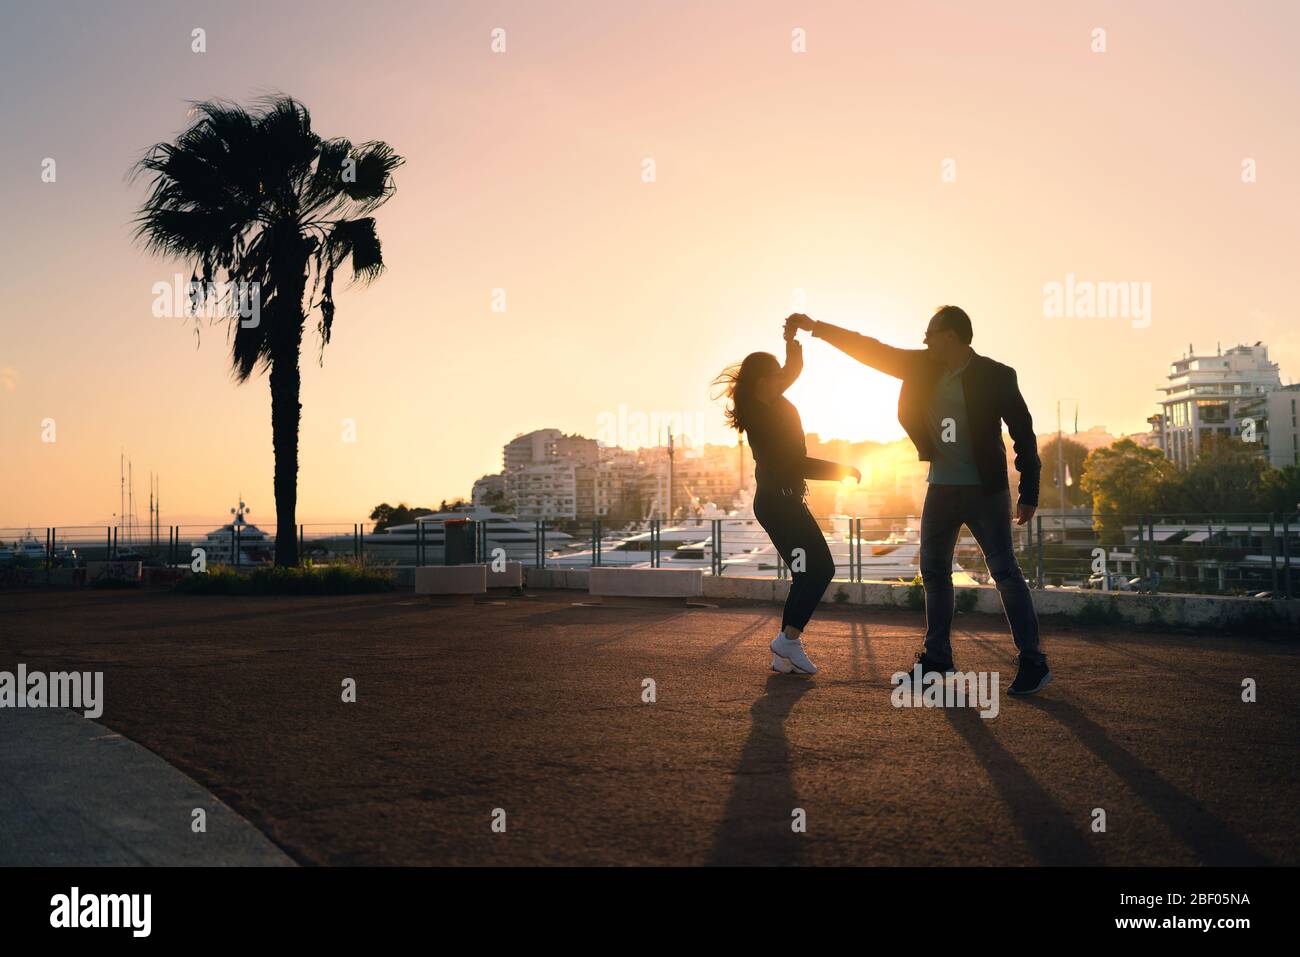 Couple dancing on city street. Spontaneous playful moment with motion. Guy and girl having fun and dating. Stylish trendy people at sunset. Urban life. Stock Photo